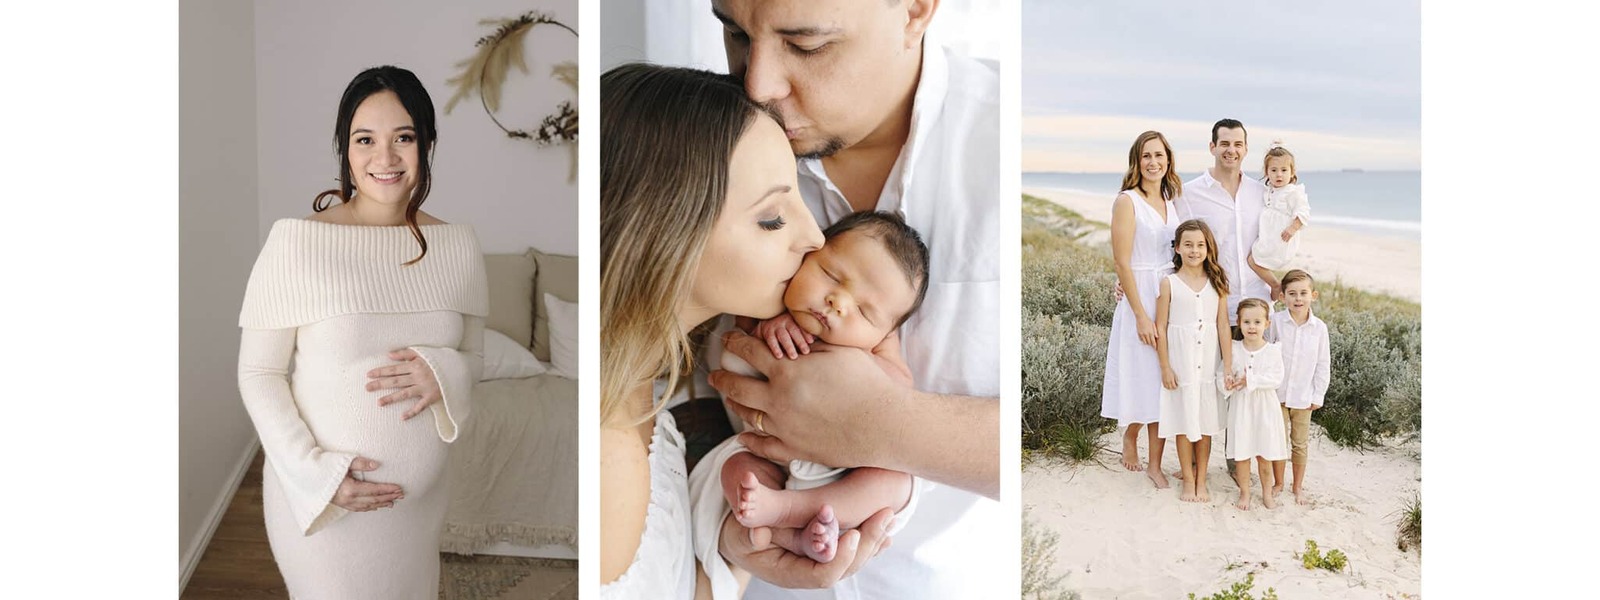 Header image for a Perth family photographer - featuring a maternity, newborn and family photo